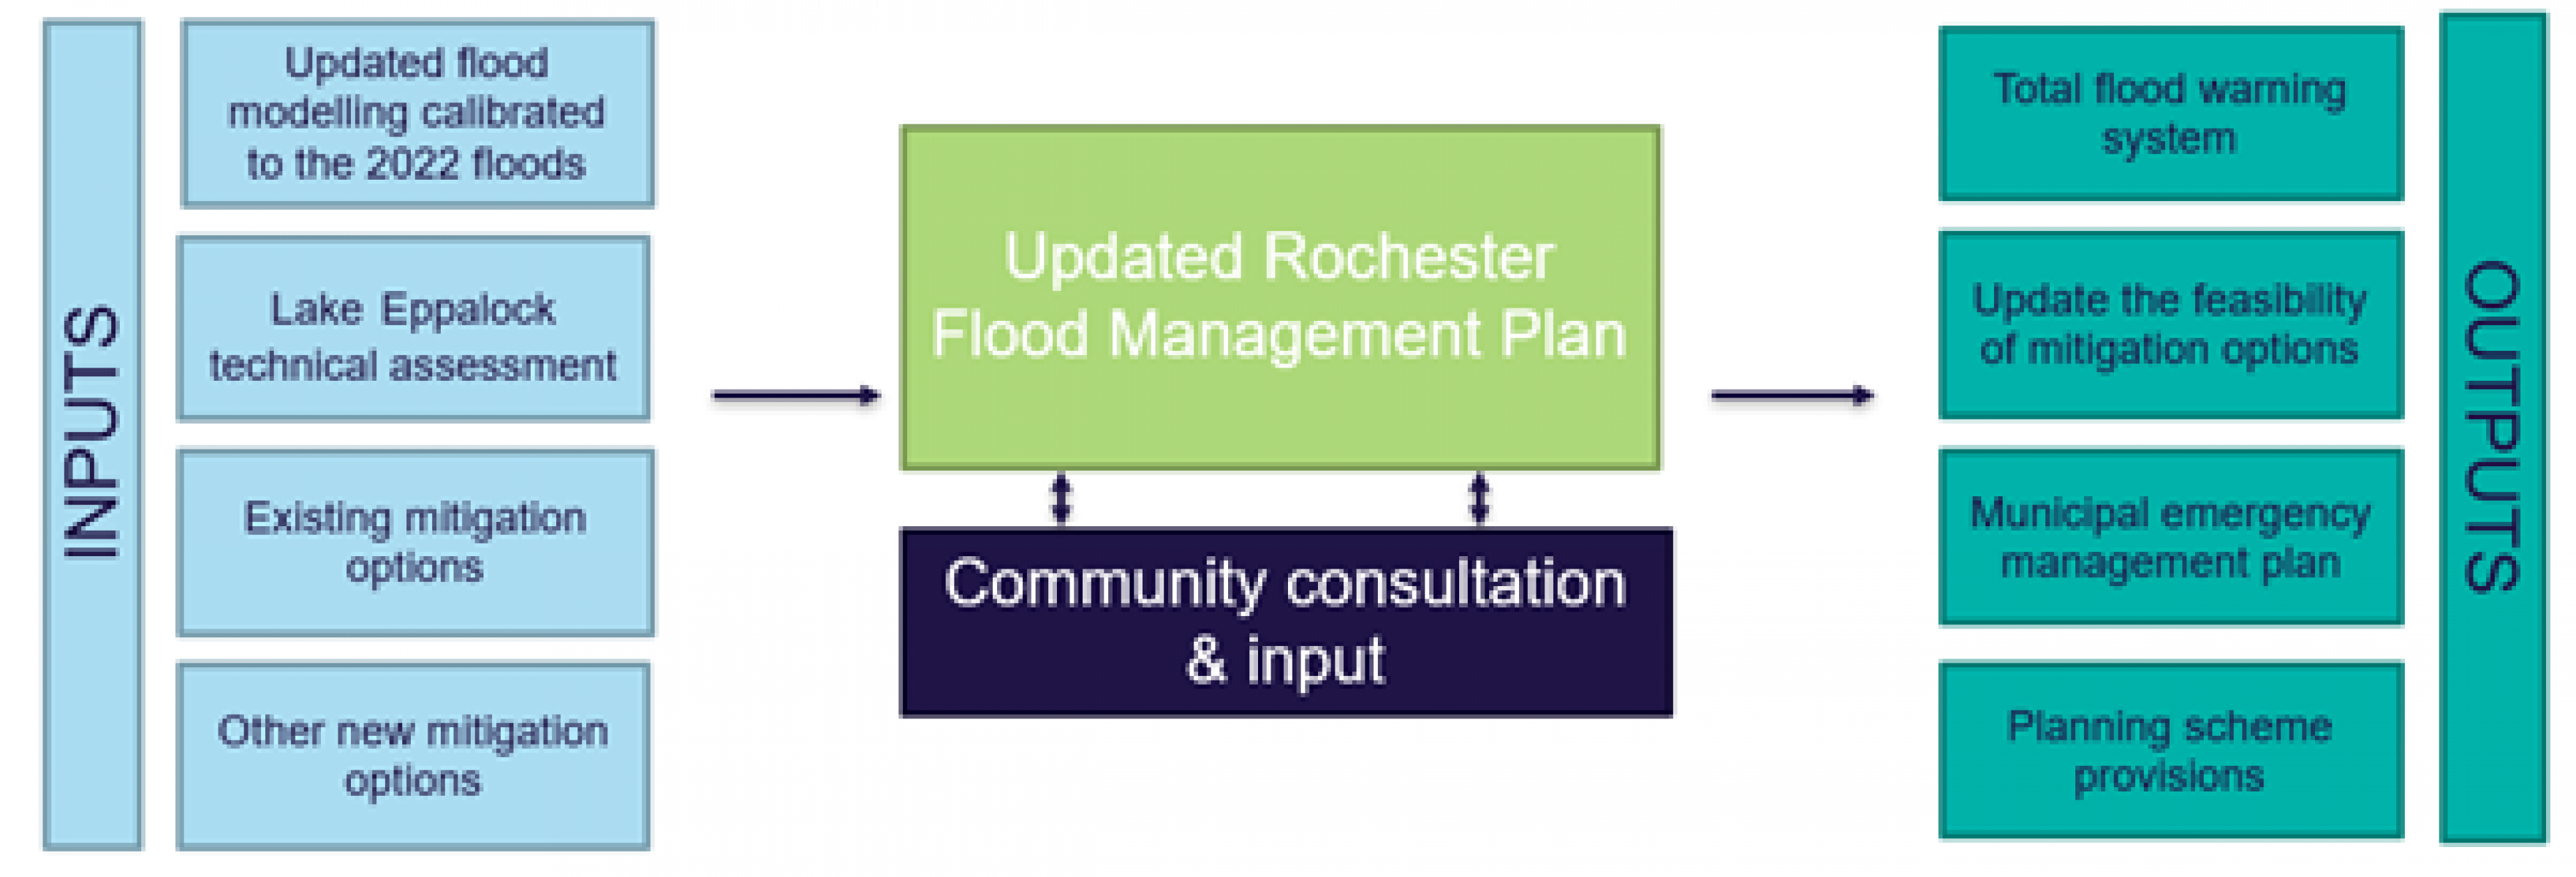 Diagram depicting the inputs and outputs of the Updated Rochester Flood Management Plan.  Inputs - updated flood modelling calibrated to the 2022 floods, Lake Eppalock technical assessment, existing mitigation options, other new migration options, community consultation and input.  Outputs: total flood warning system, updated feasibility of mitigation options, municipal emergency management plan, planning scheme provisions.